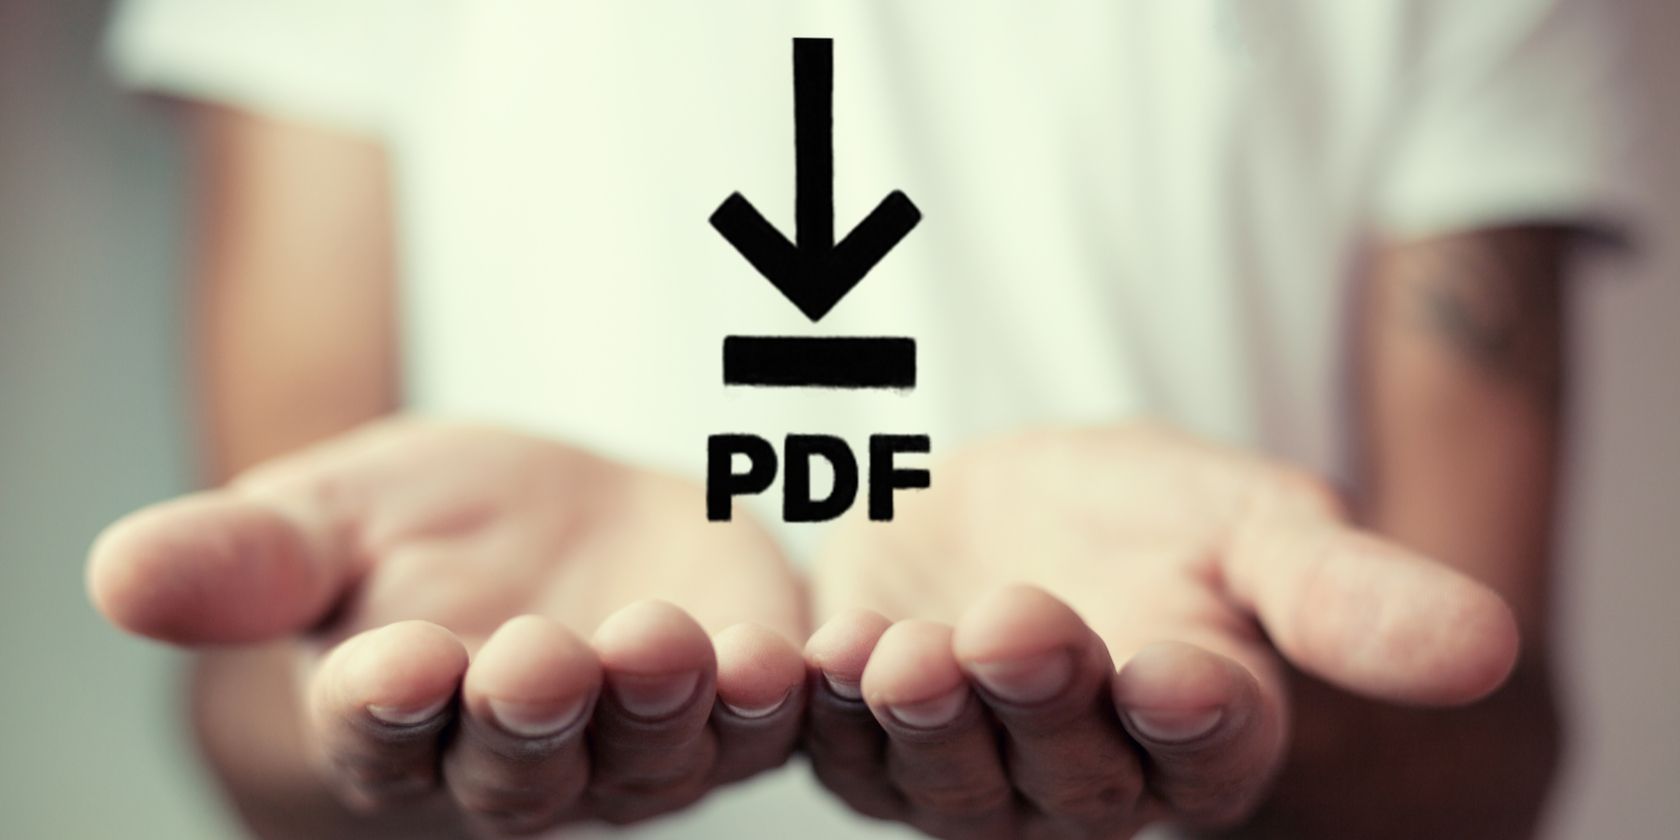 shrinking a pdf file size for mac